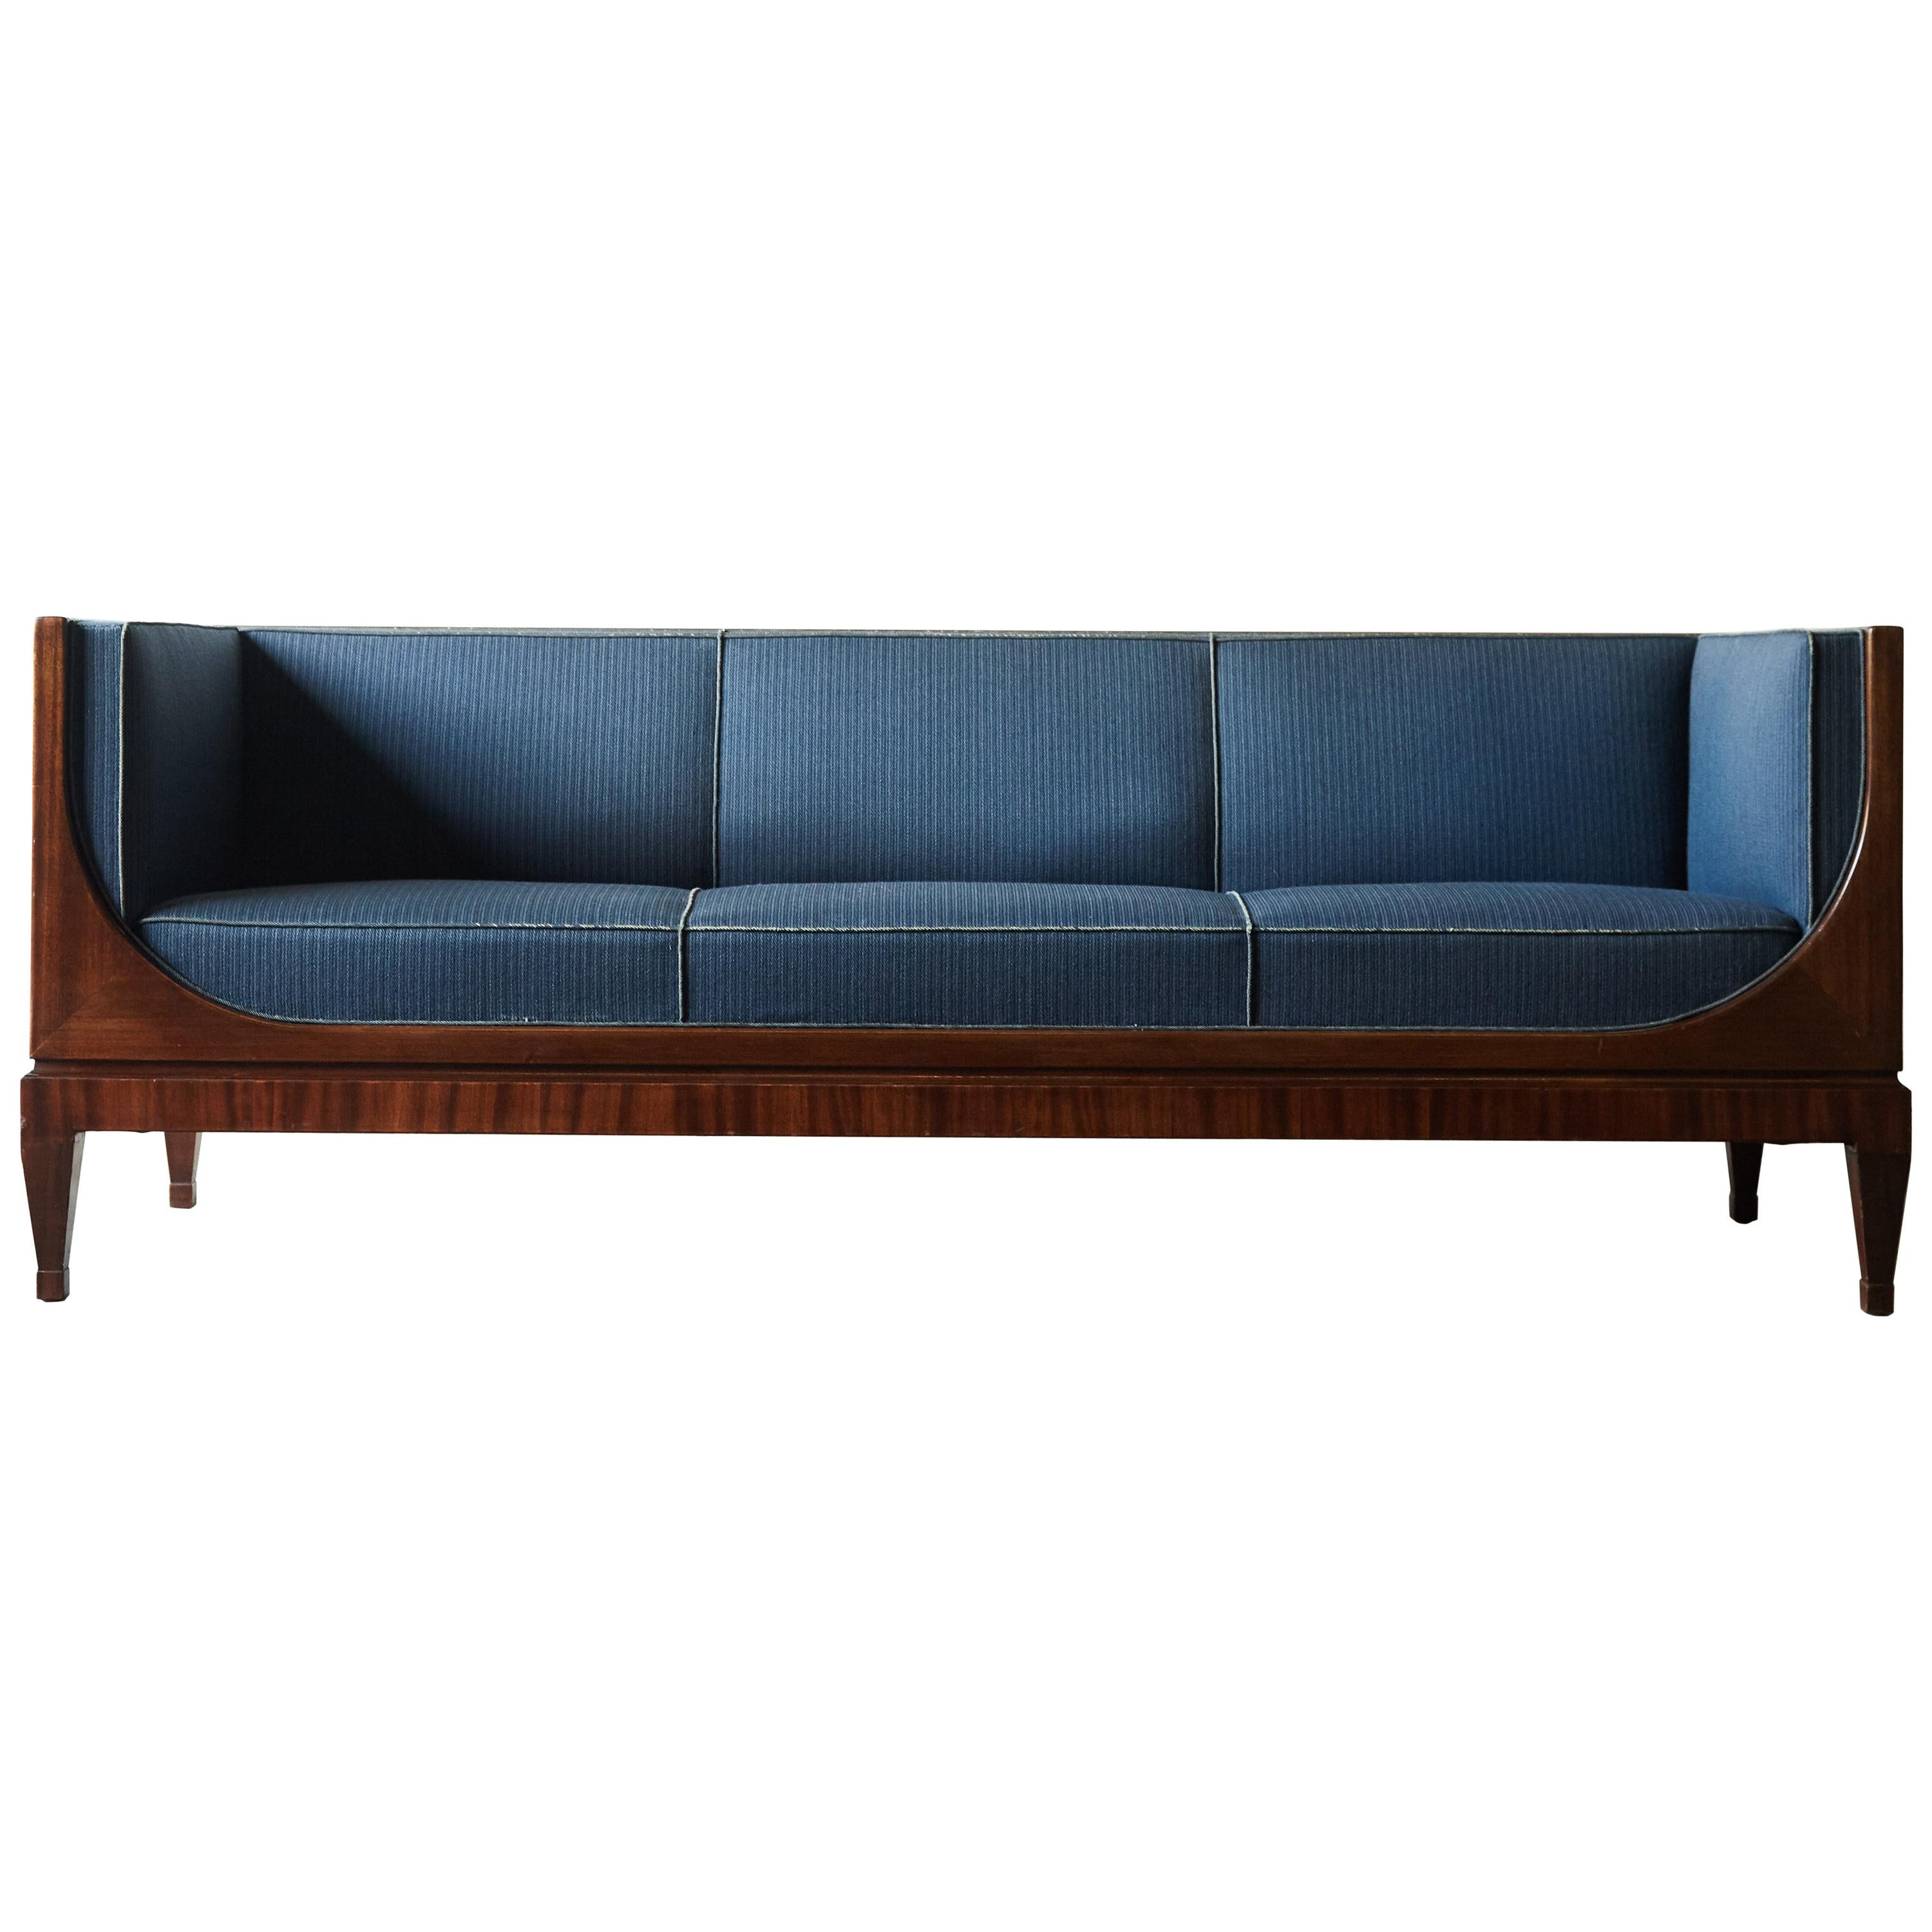 Rare Frits Henningsen Box Sofa, Denmark, 1940s-1950s - recovering required